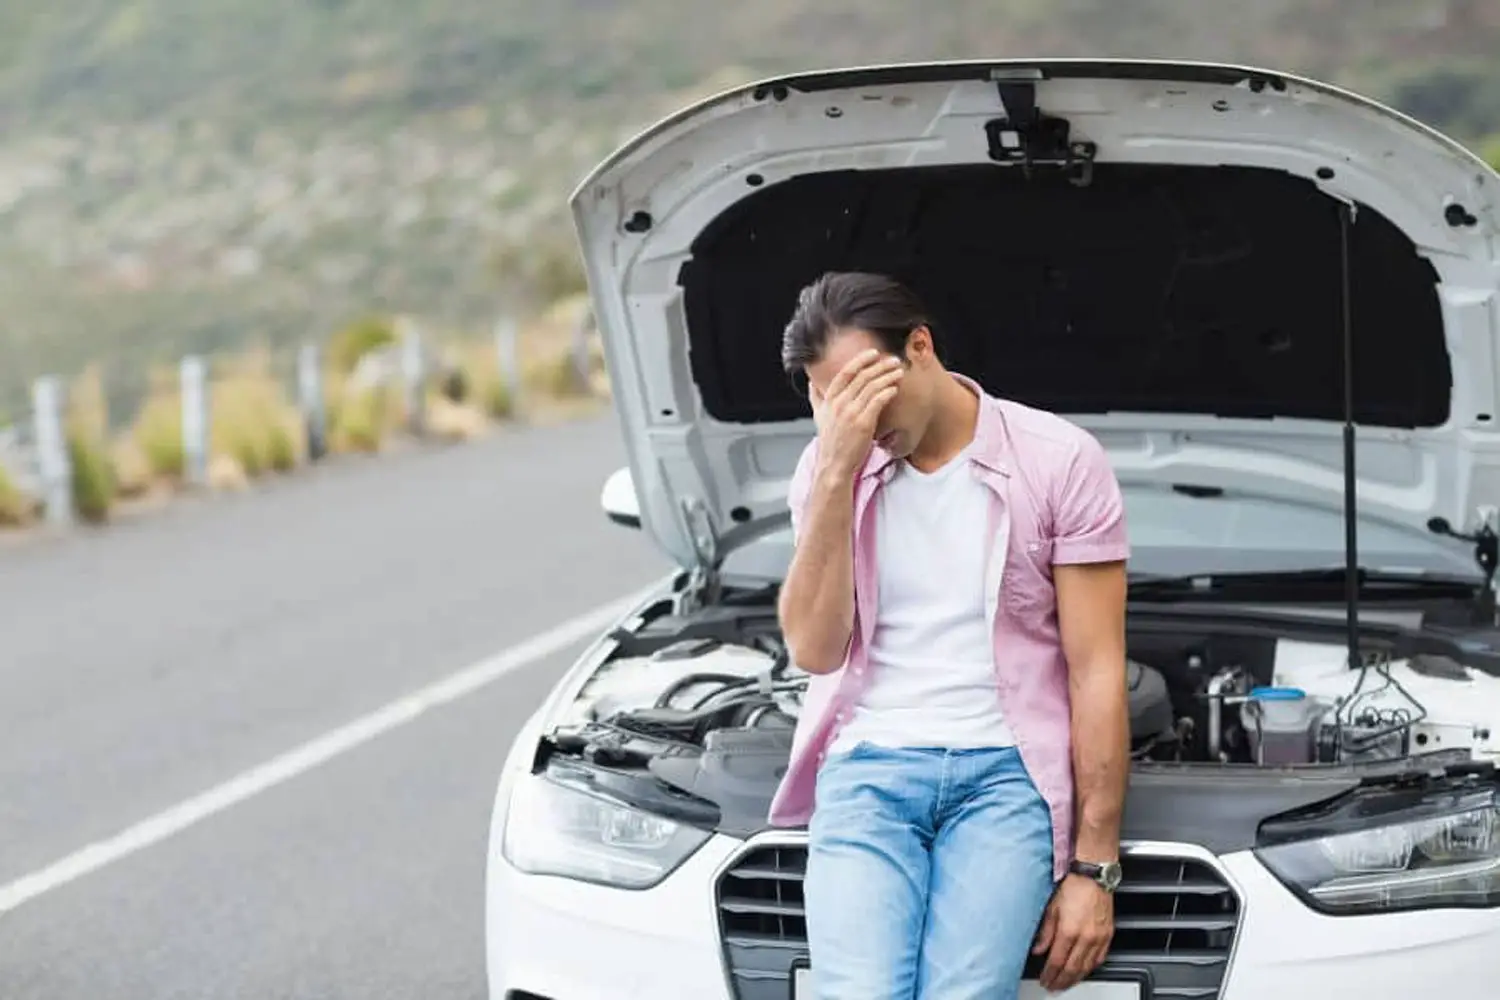 Can A Car Battery Die While Driving